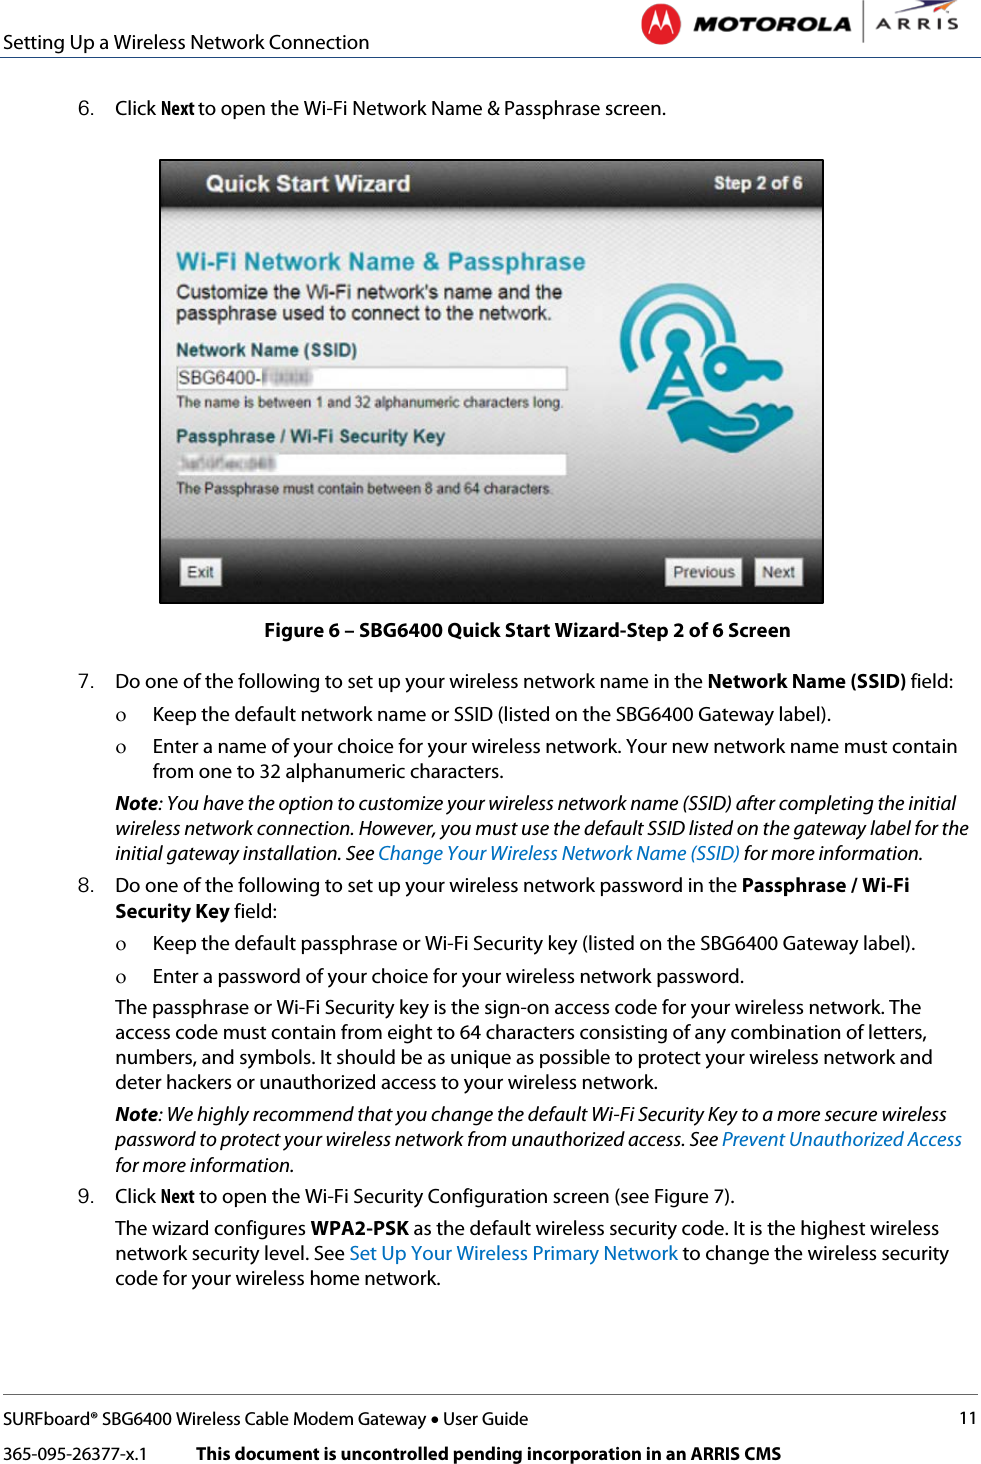 Setting Up a Wireless Network Connection   SURFboard® SBG6400 Wireless Cable Modem Gateway • User Guide 11 365-095-26377-x.1            This document is uncontrolled pending incorporation in an ARRIS CMS  6. Click Next to open the Wi-Fi Network Name &amp; Passphrase screen.  Figure 6 – SBG6400 Quick Start Wizard-Step 2 of 6 Screen 7. Do one of the following to set up your wireless network name in the Network Name (SSID) field: ο Keep the default network name or SSID (listed on the SBG6400 Gateway label). ο Enter a name of your choice for your wireless network. Your new network name must contain from one to 32 alphanumeric characters. Note: You have the option to customize your wireless network name (SSID) after completing the initial wireless network connection. However, you must use the default SSID listed on the gateway label for the initial gateway installation. See Change Your Wireless Network Name (SSID) for more information. 8. Do one of the following to set up your wireless network password in the Passphrase / Wi-Fi Security Key field: ο Keep the default passphrase or Wi-Fi Security key (listed on the SBG6400 Gateway label). ο Enter a password of your choice for your wireless network password.  The passphrase or Wi-Fi Security key is the sign-on access code for your wireless network. The access code must contain from eight to 64 characters consisting of any combination of letters, numbers, and symbols. It should be as unique as possible to protect your wireless network and deter hackers or unauthorized access to your wireless network. Note: We highly recommend that you change the default Wi-Fi Security Key to a more secure wireless password to protect your wireless network from unauthorized access. See Prevent Unauthorized Access for more information. 9. Click Next to open the Wi-Fi Security Configuration screen (see Figure 7).  The wizard configures WPA2-PSK as the default wireless security code. It is the highest wireless network security level. See Set Up Your Wireless Primary Network to change the wireless security code for your wireless home network.  